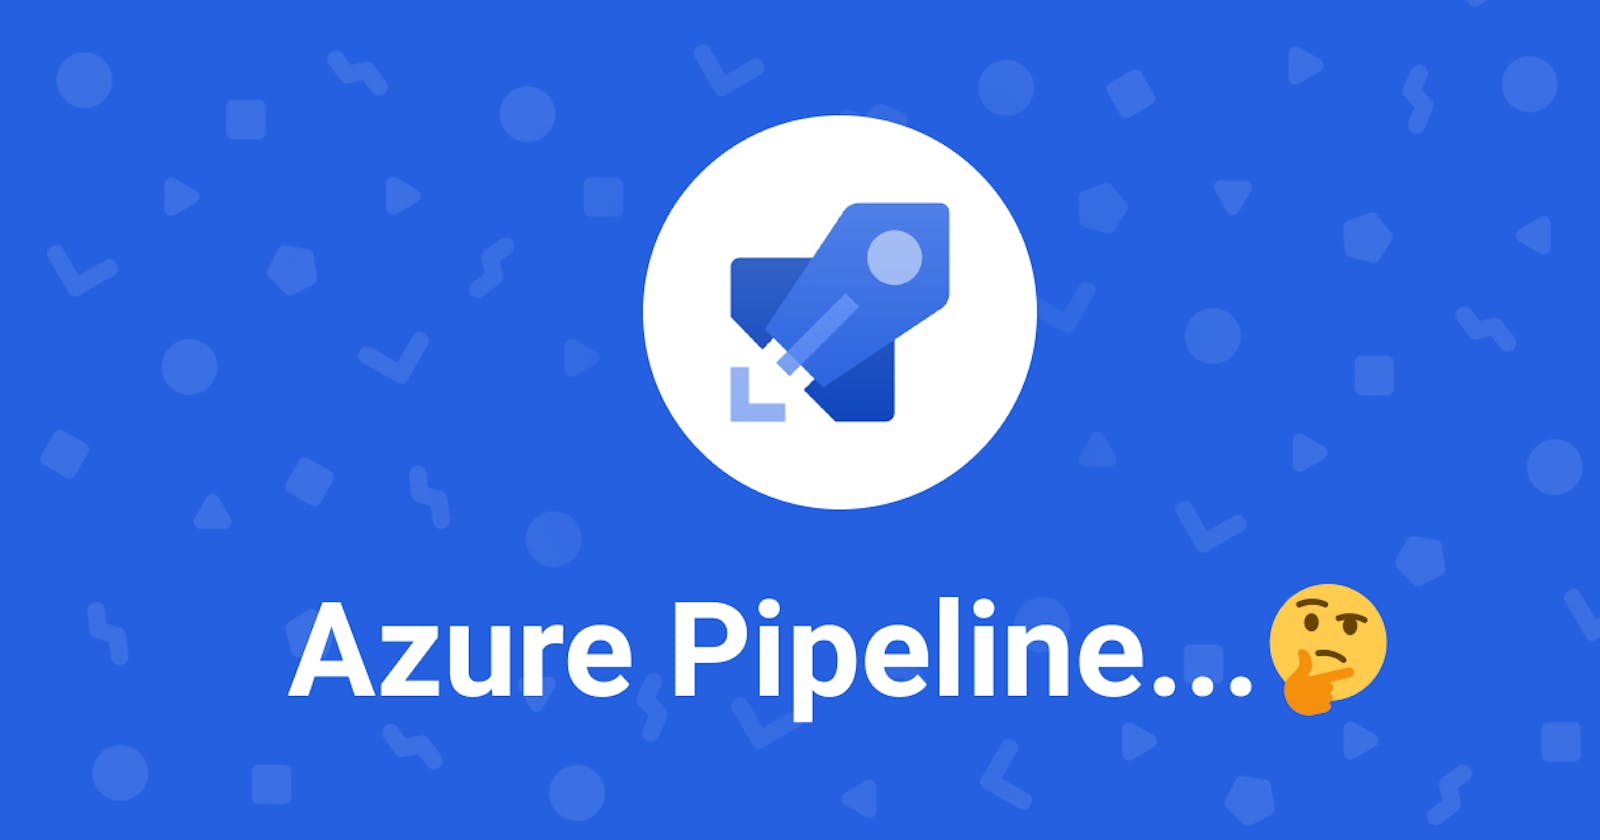 New to Azure pipelines? Learn how to get started, easily!!!